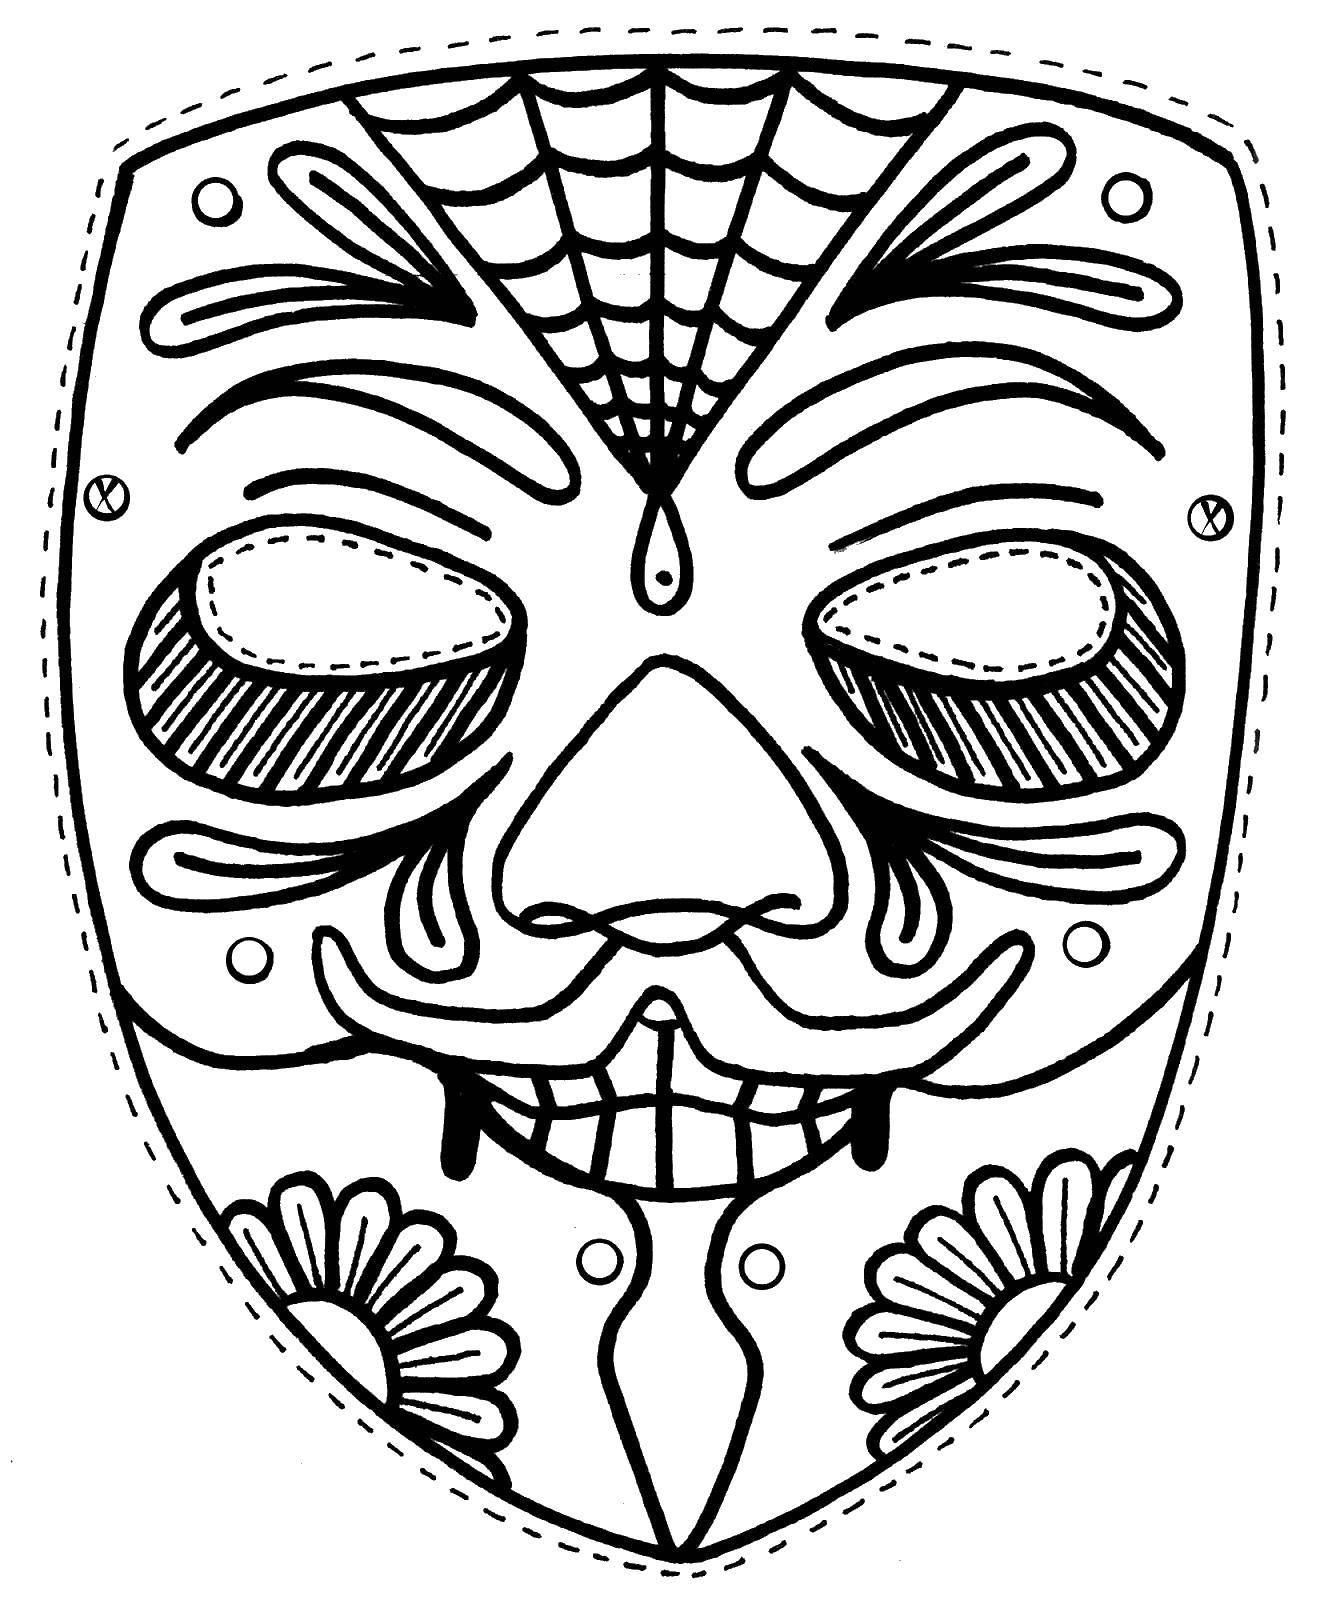 Coloring Halloween mask. Category Masks . Tags:  mask, Halloween.